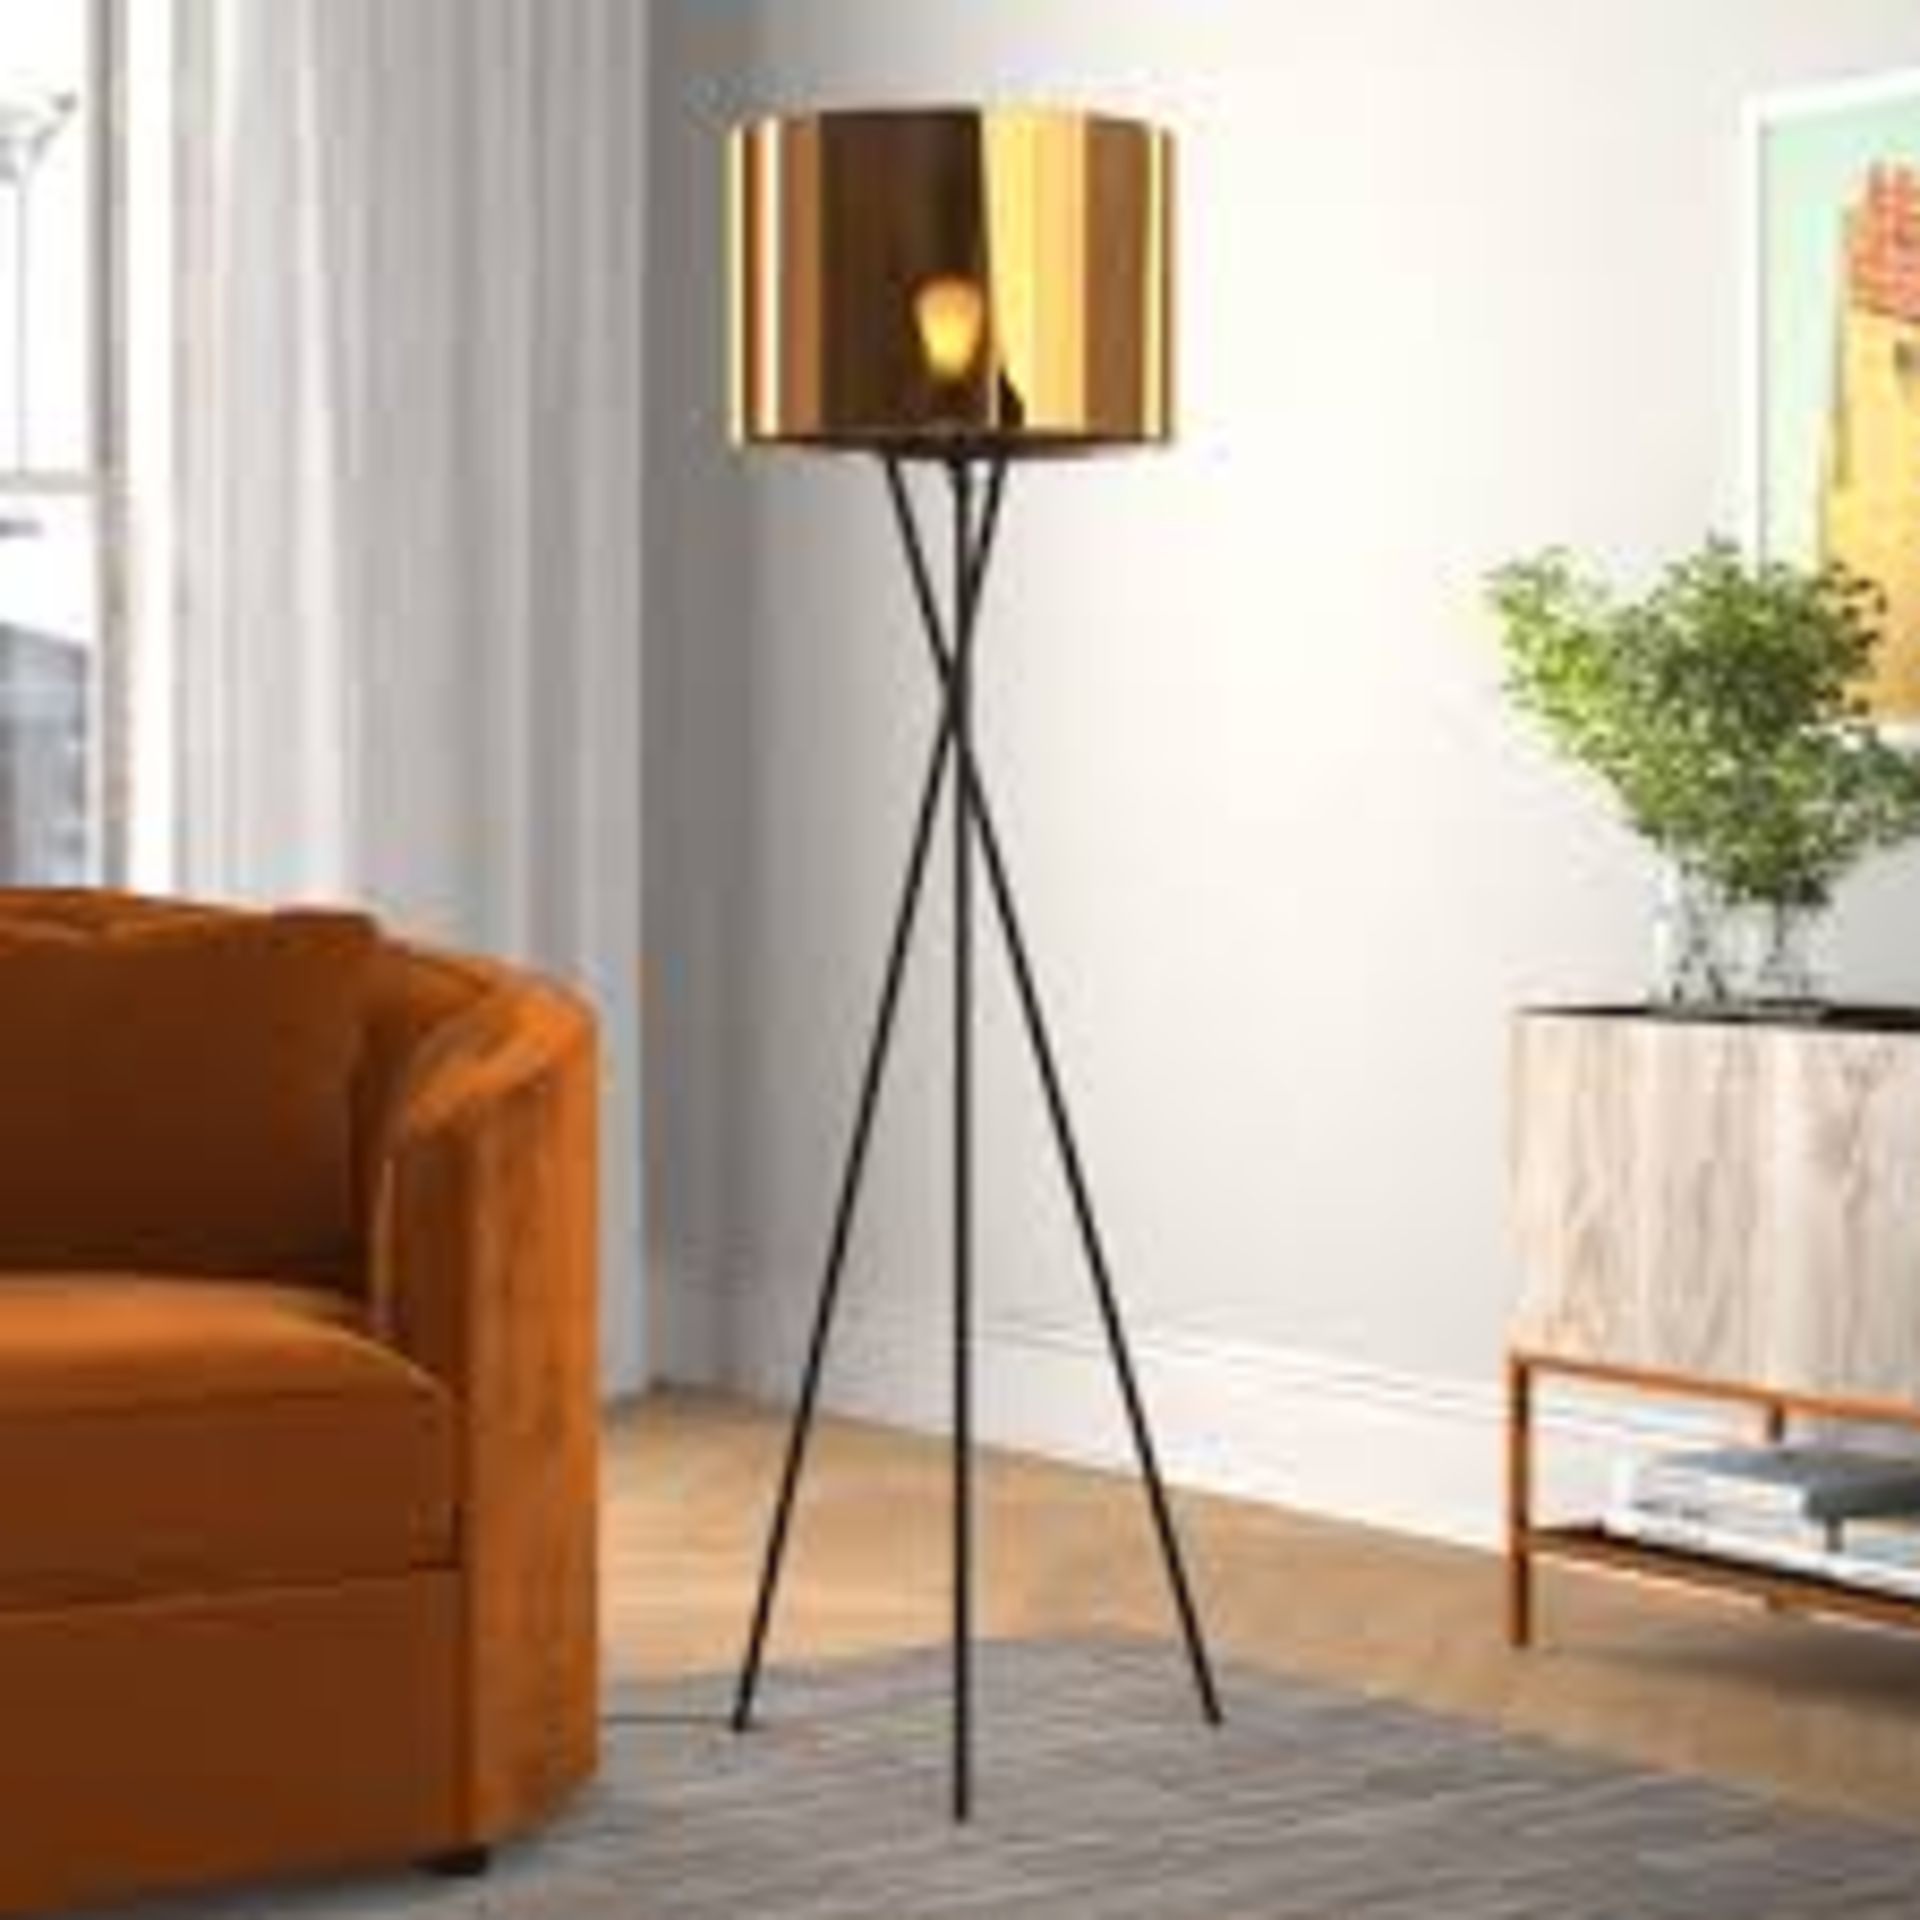 Boxed Etenelle Tripod Floor Lamp RRP £100 (18604) (Pictures Are For Illustration Purposes Only) (